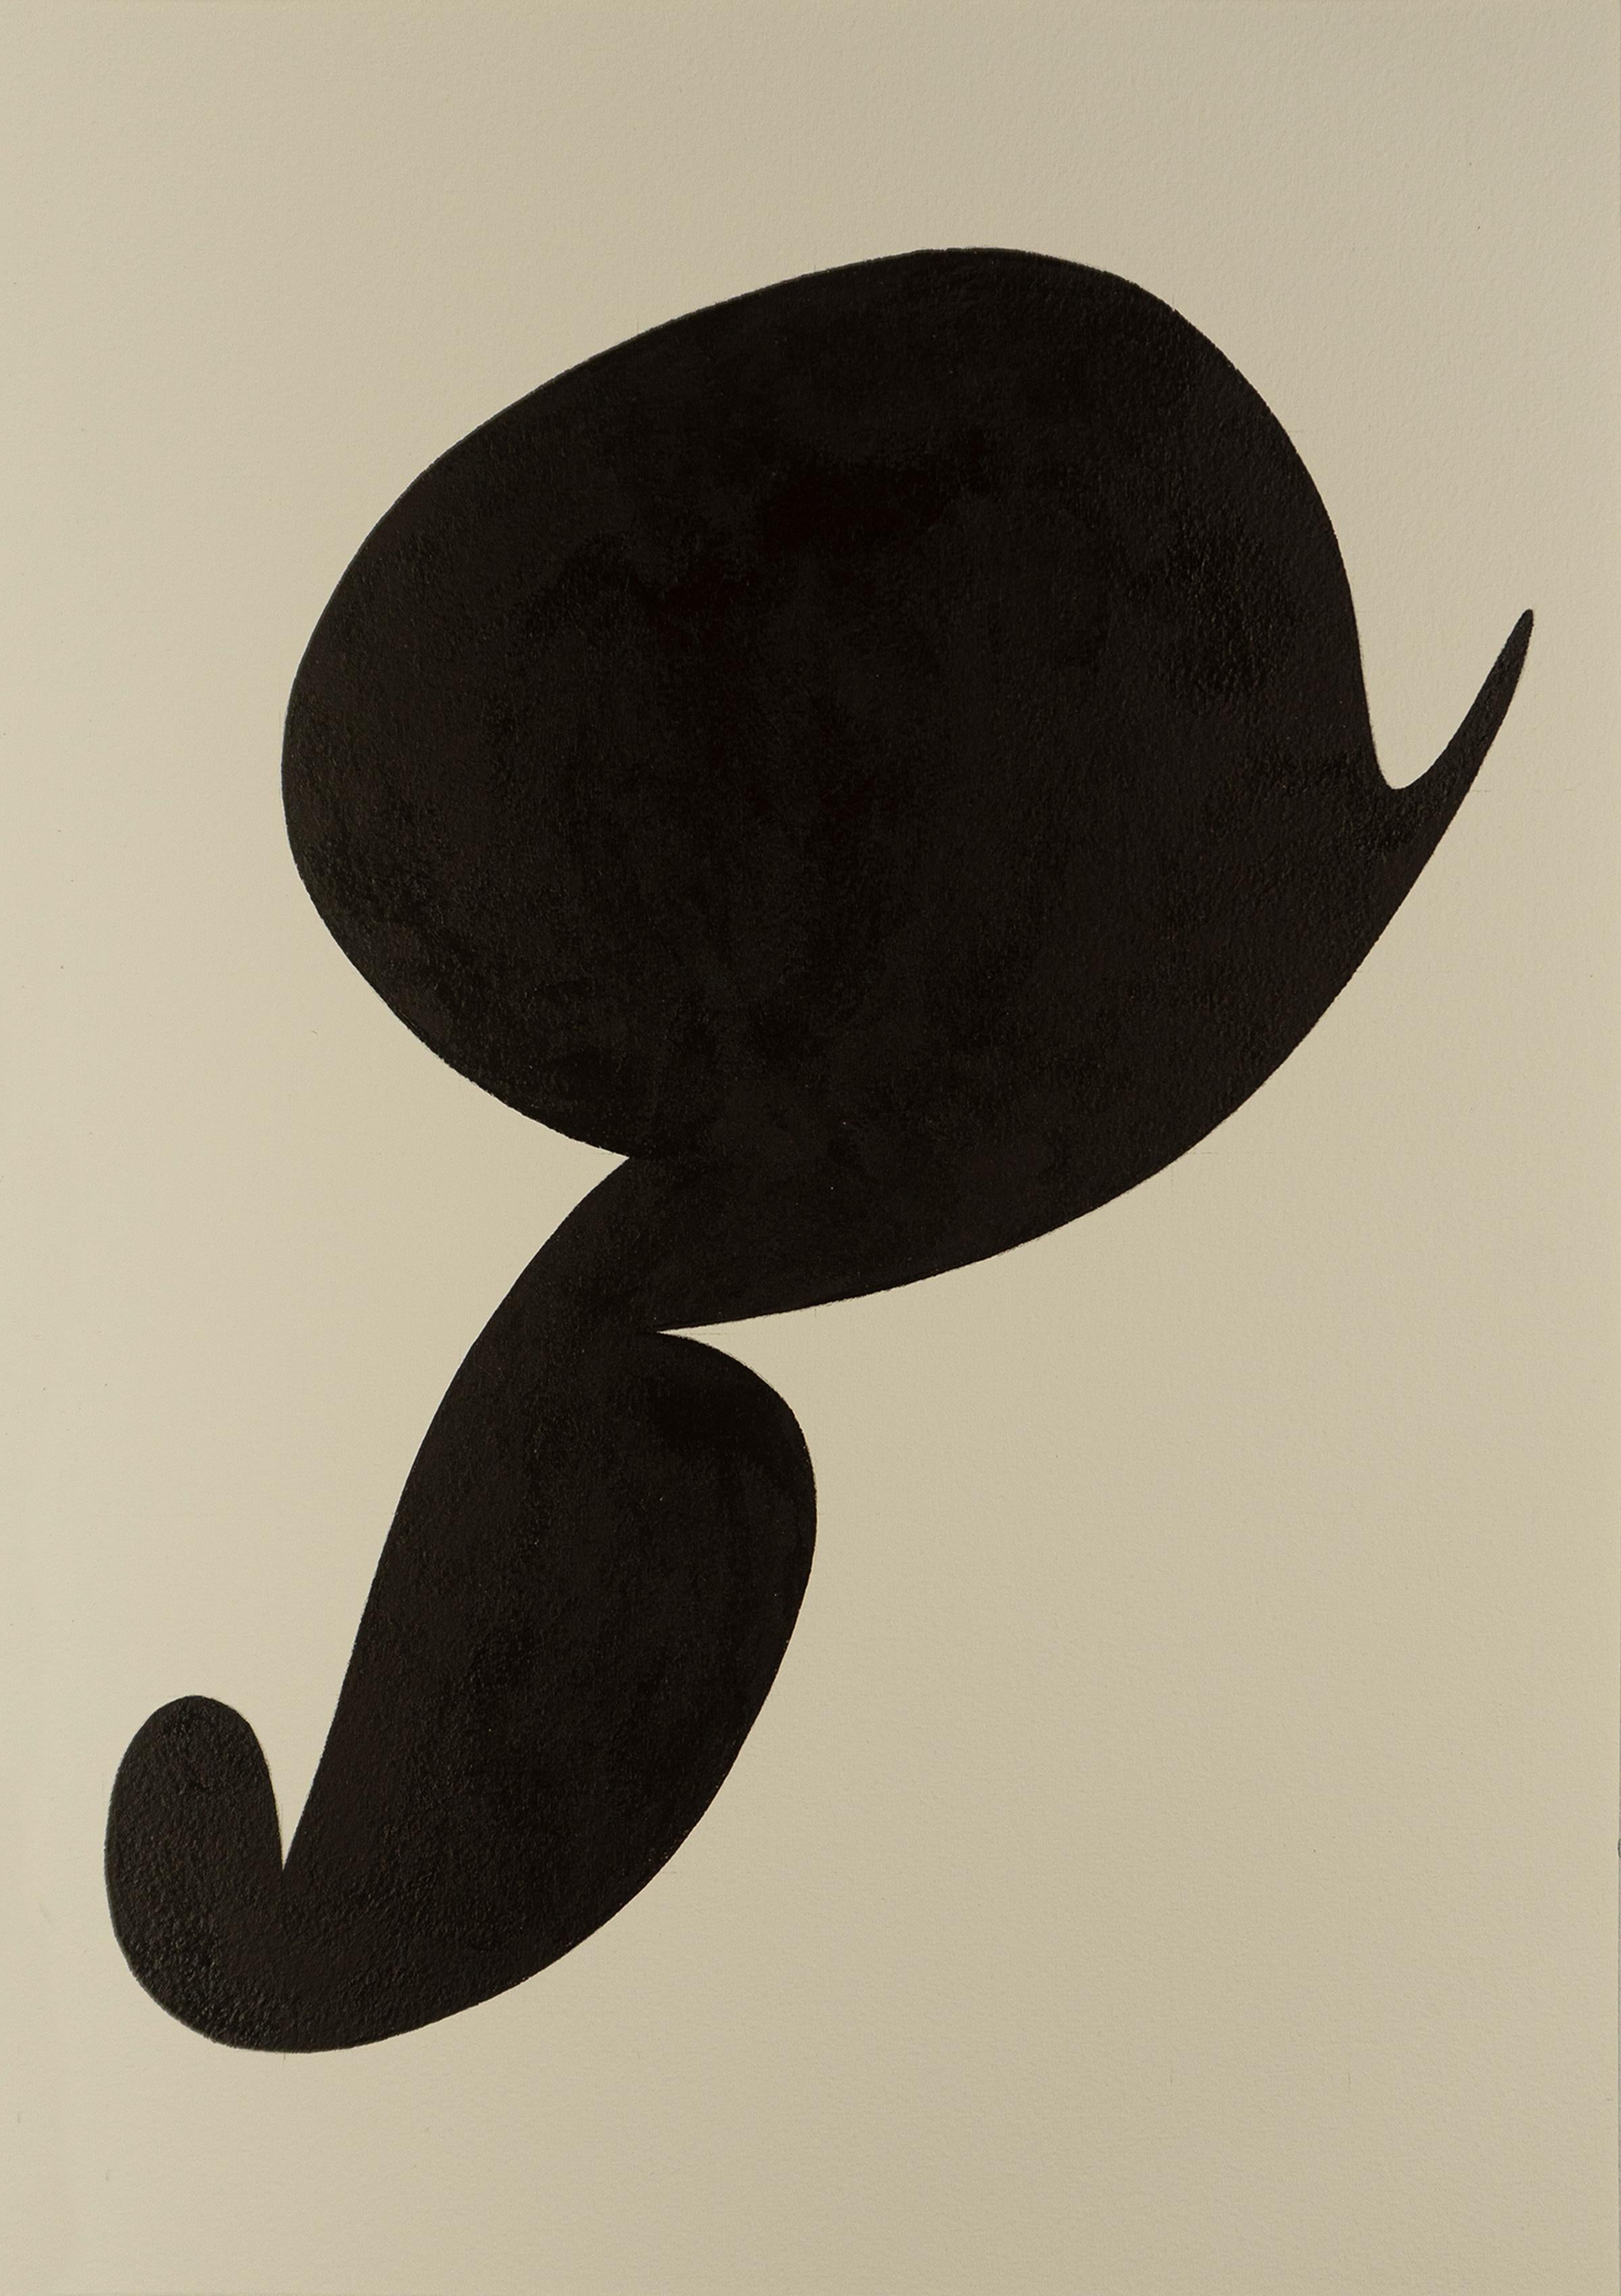 Ryan Park Abstract Painting - Shape 36 (2019) - Abstract shape, work on paper, minimalist, black & white